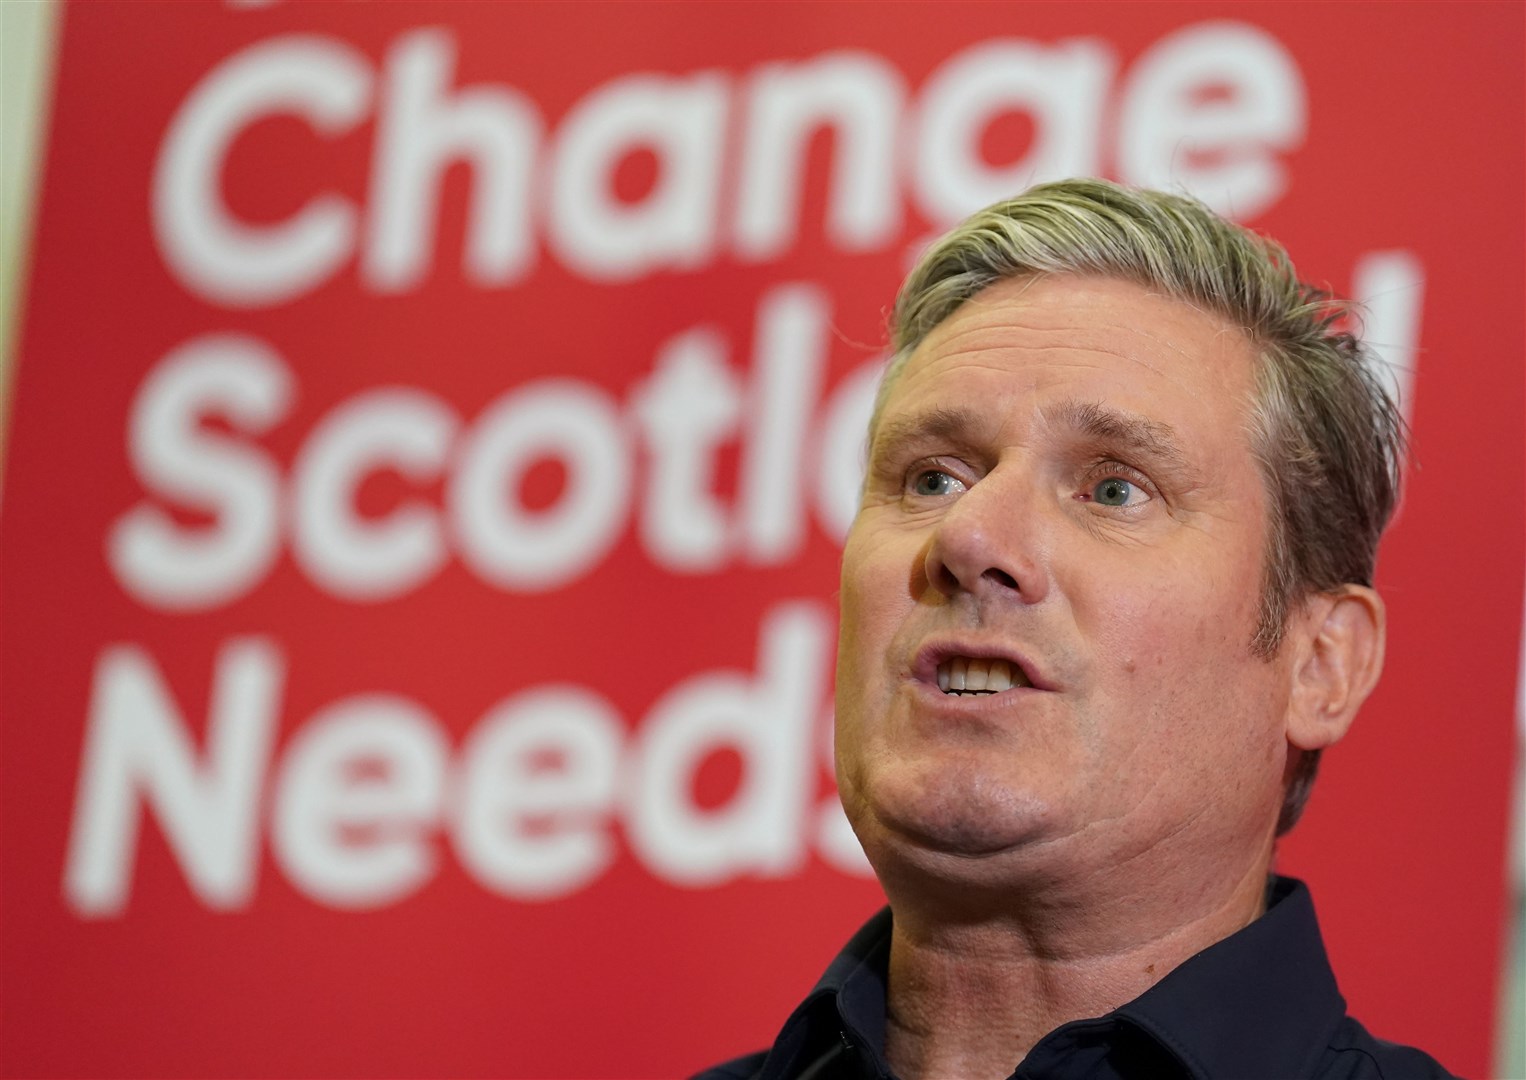 Labour leader Sir Keir Starmer said he will not put forward ‘uncosted’ policy commitments (Andrew Milligan/PA)